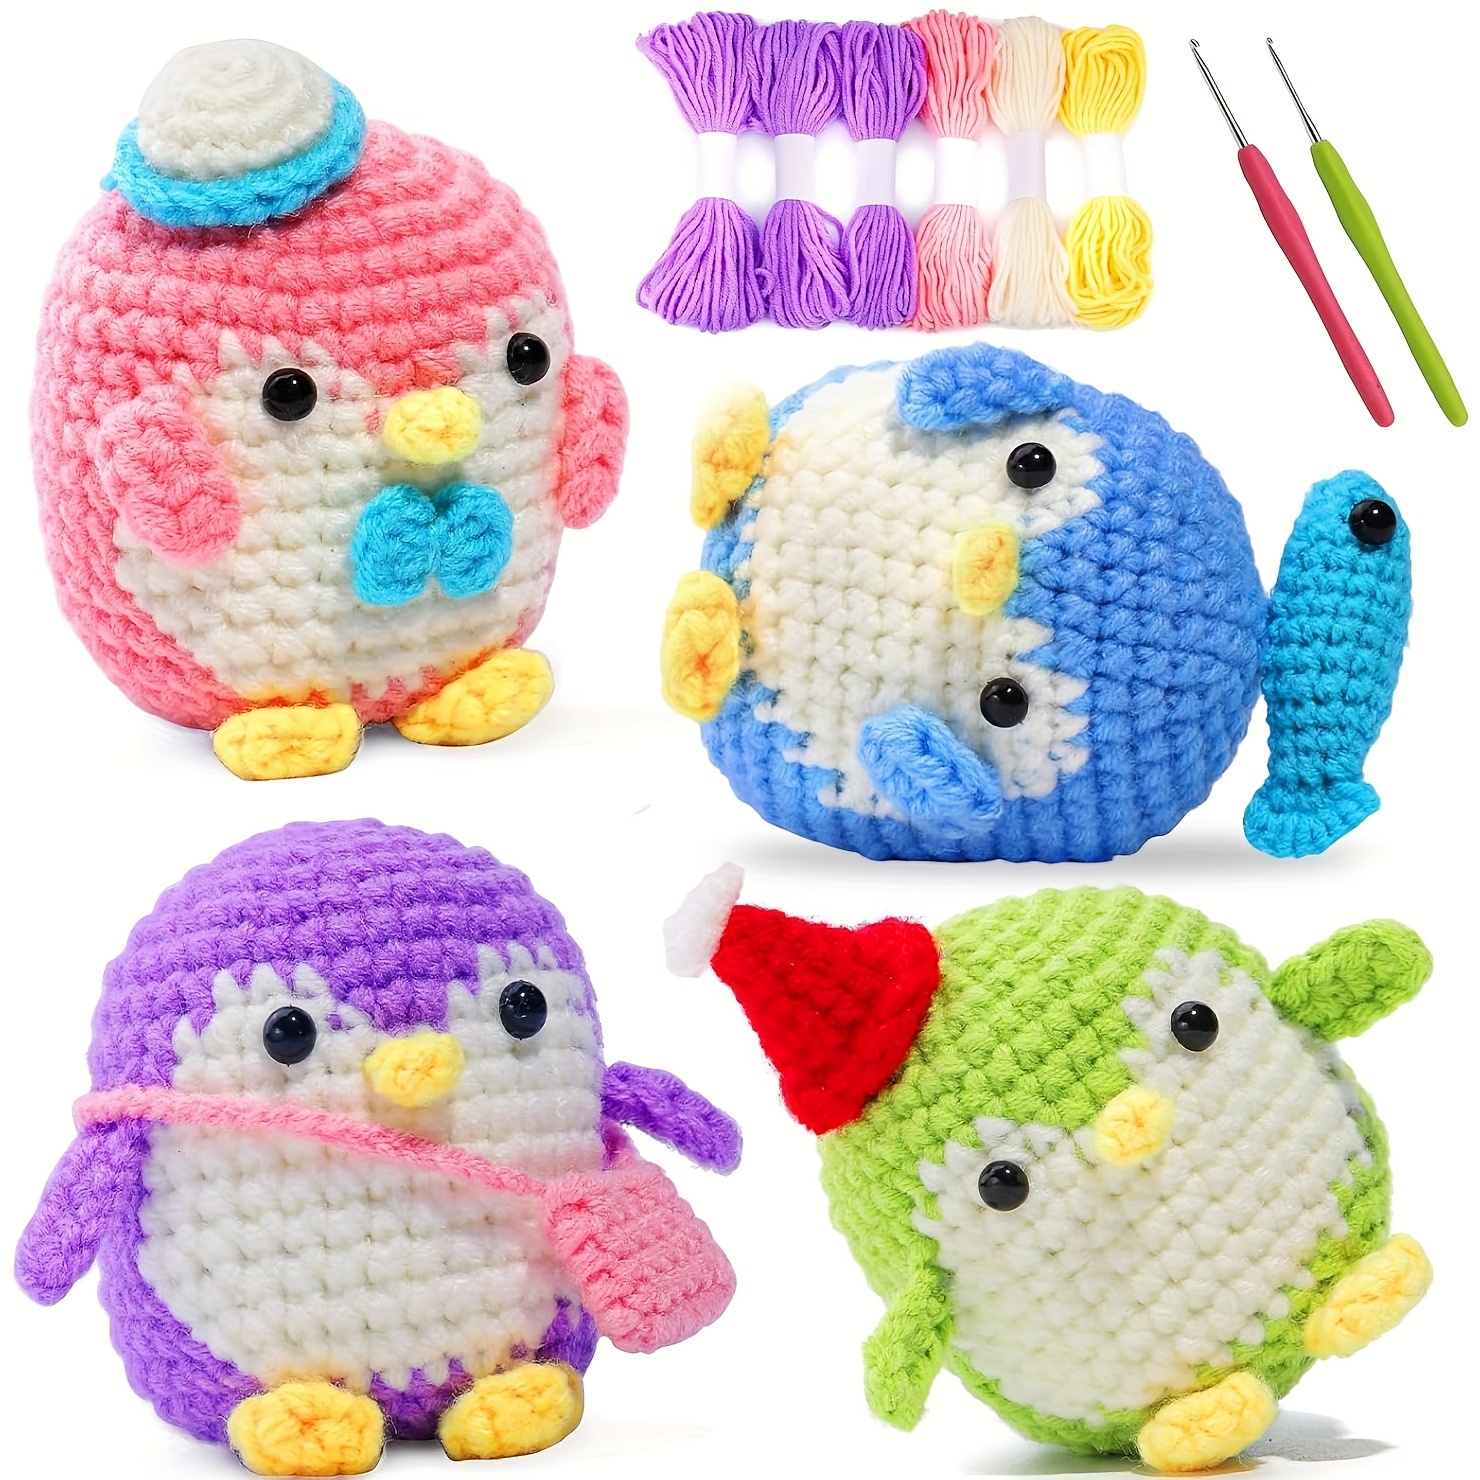 

Penguin Crochet Kit For Beginners - 4-piece Cute Animal Crochet Set With Easy Video Tutorial, Includes Hooks, Yarns & Markers, Complete Crafting Kit